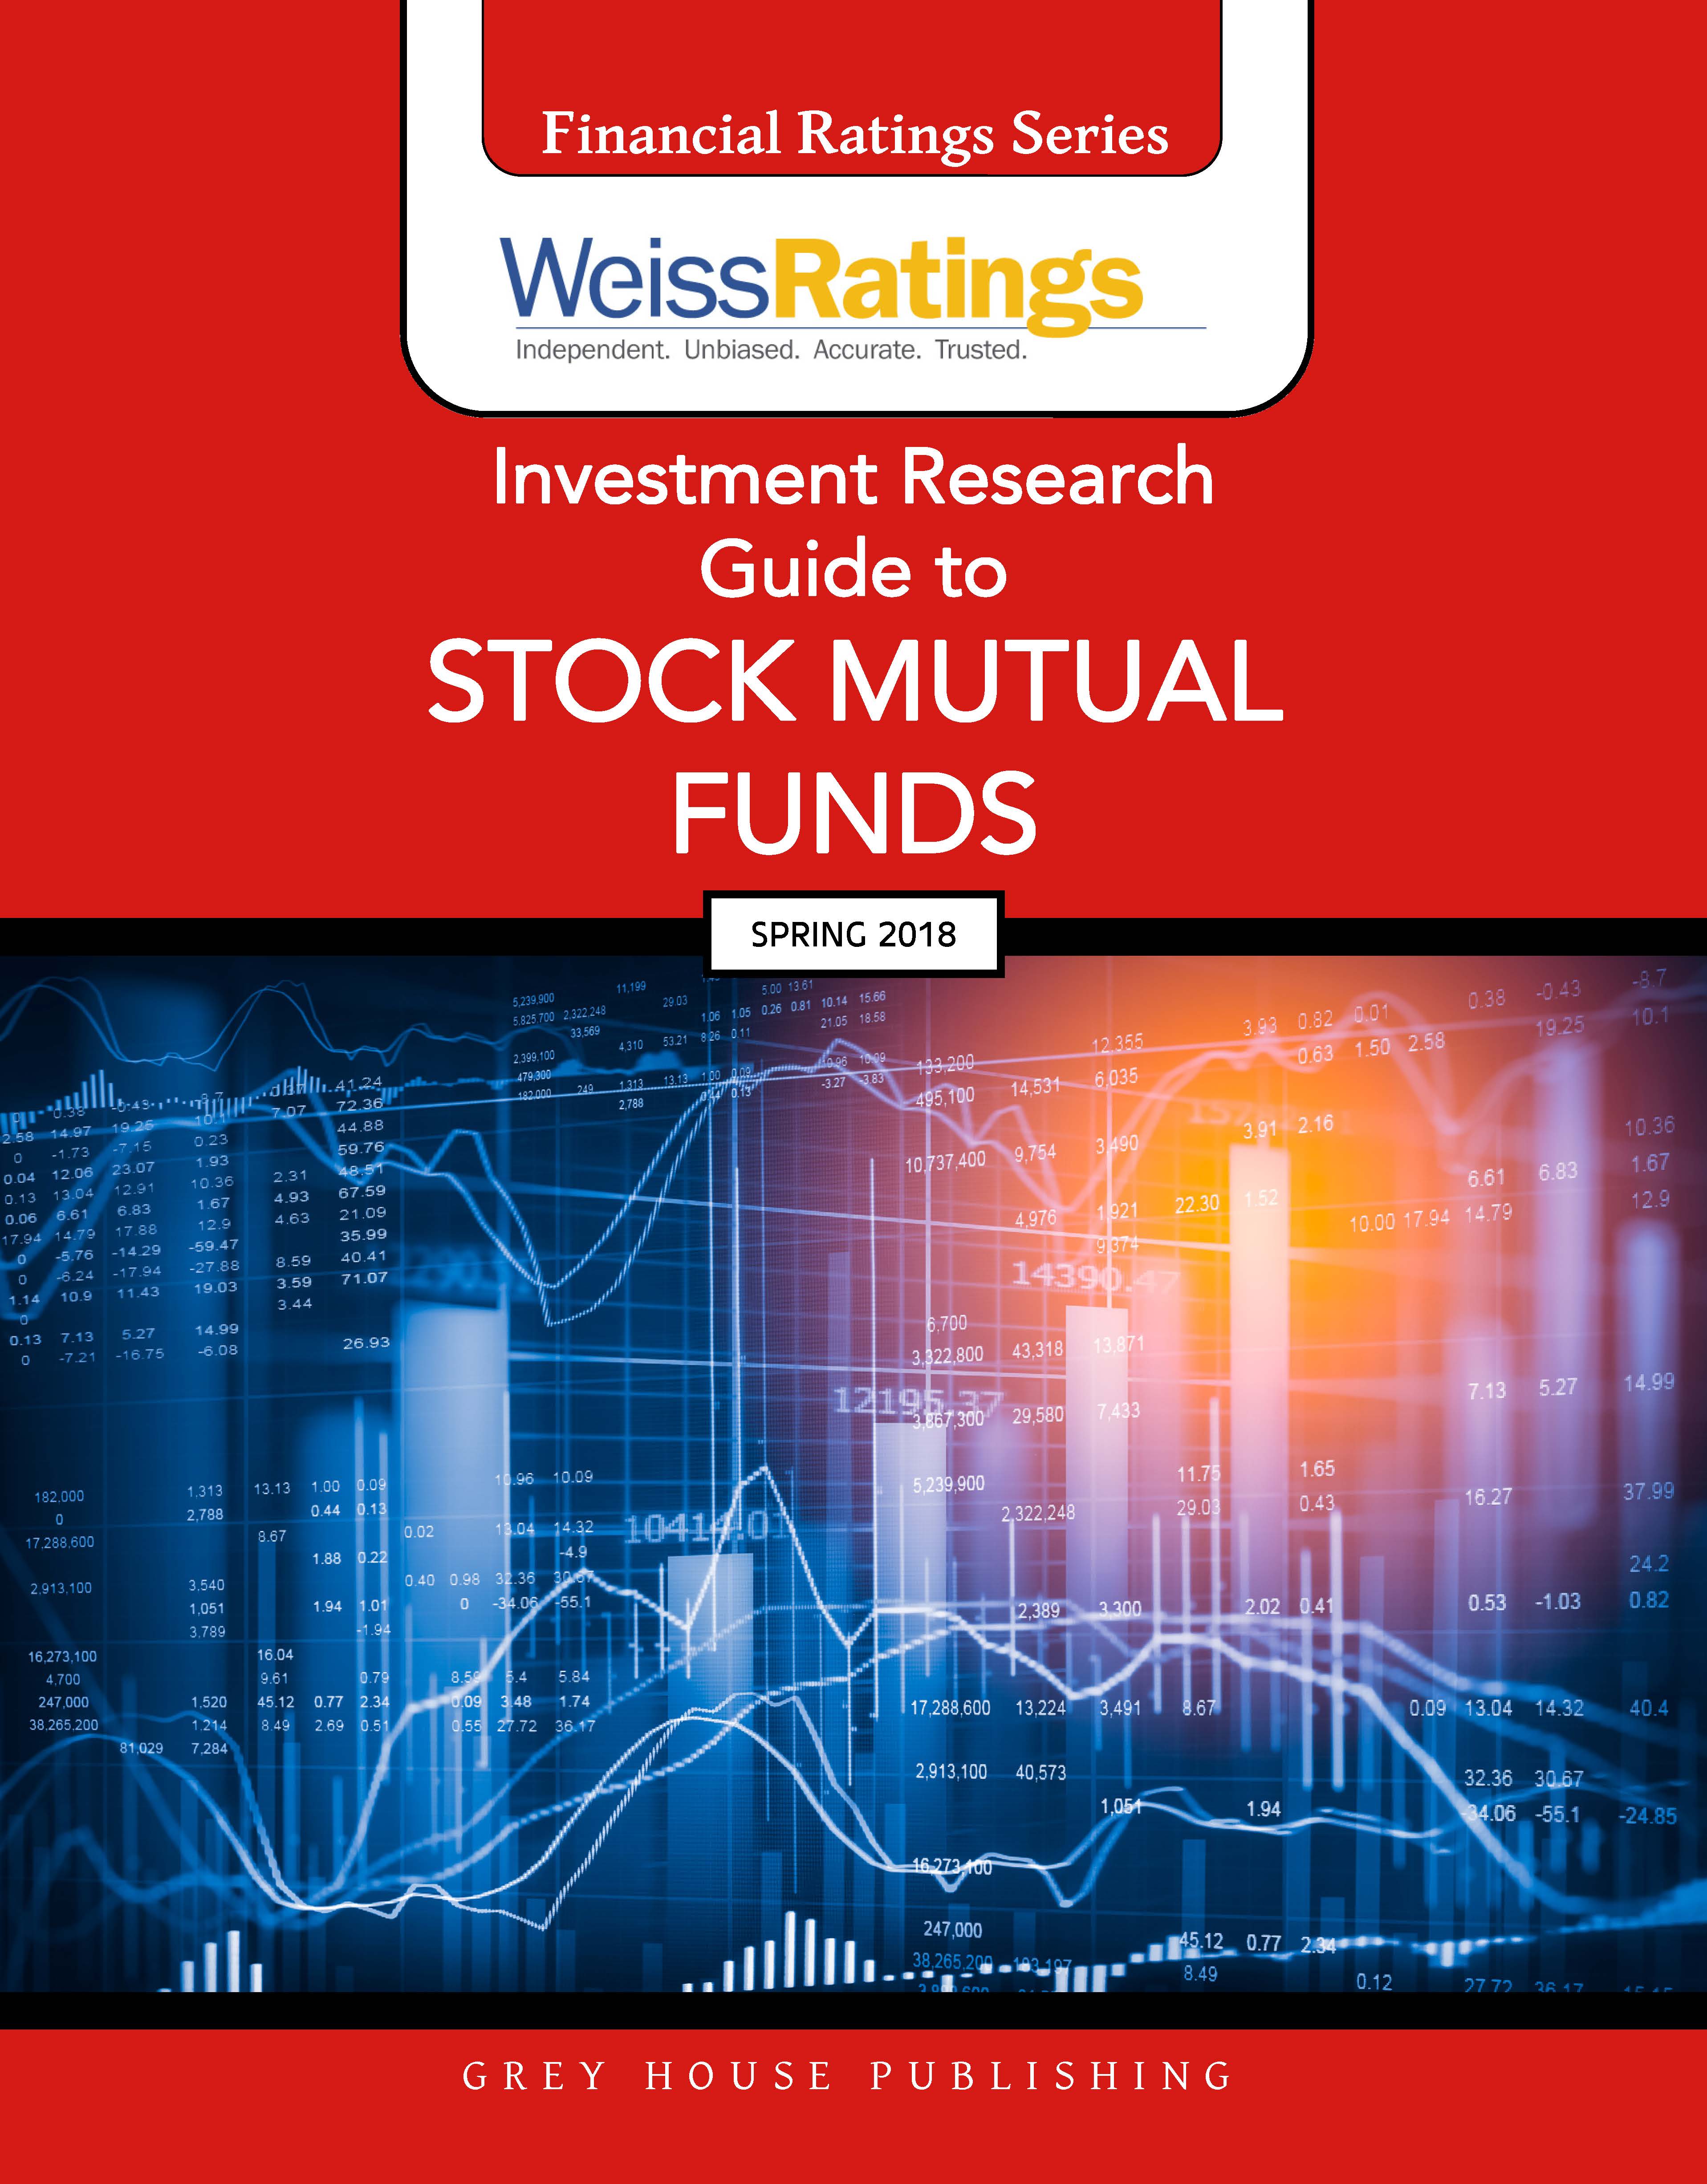 Weiss Ratings Guide to Stock Mutual Funds